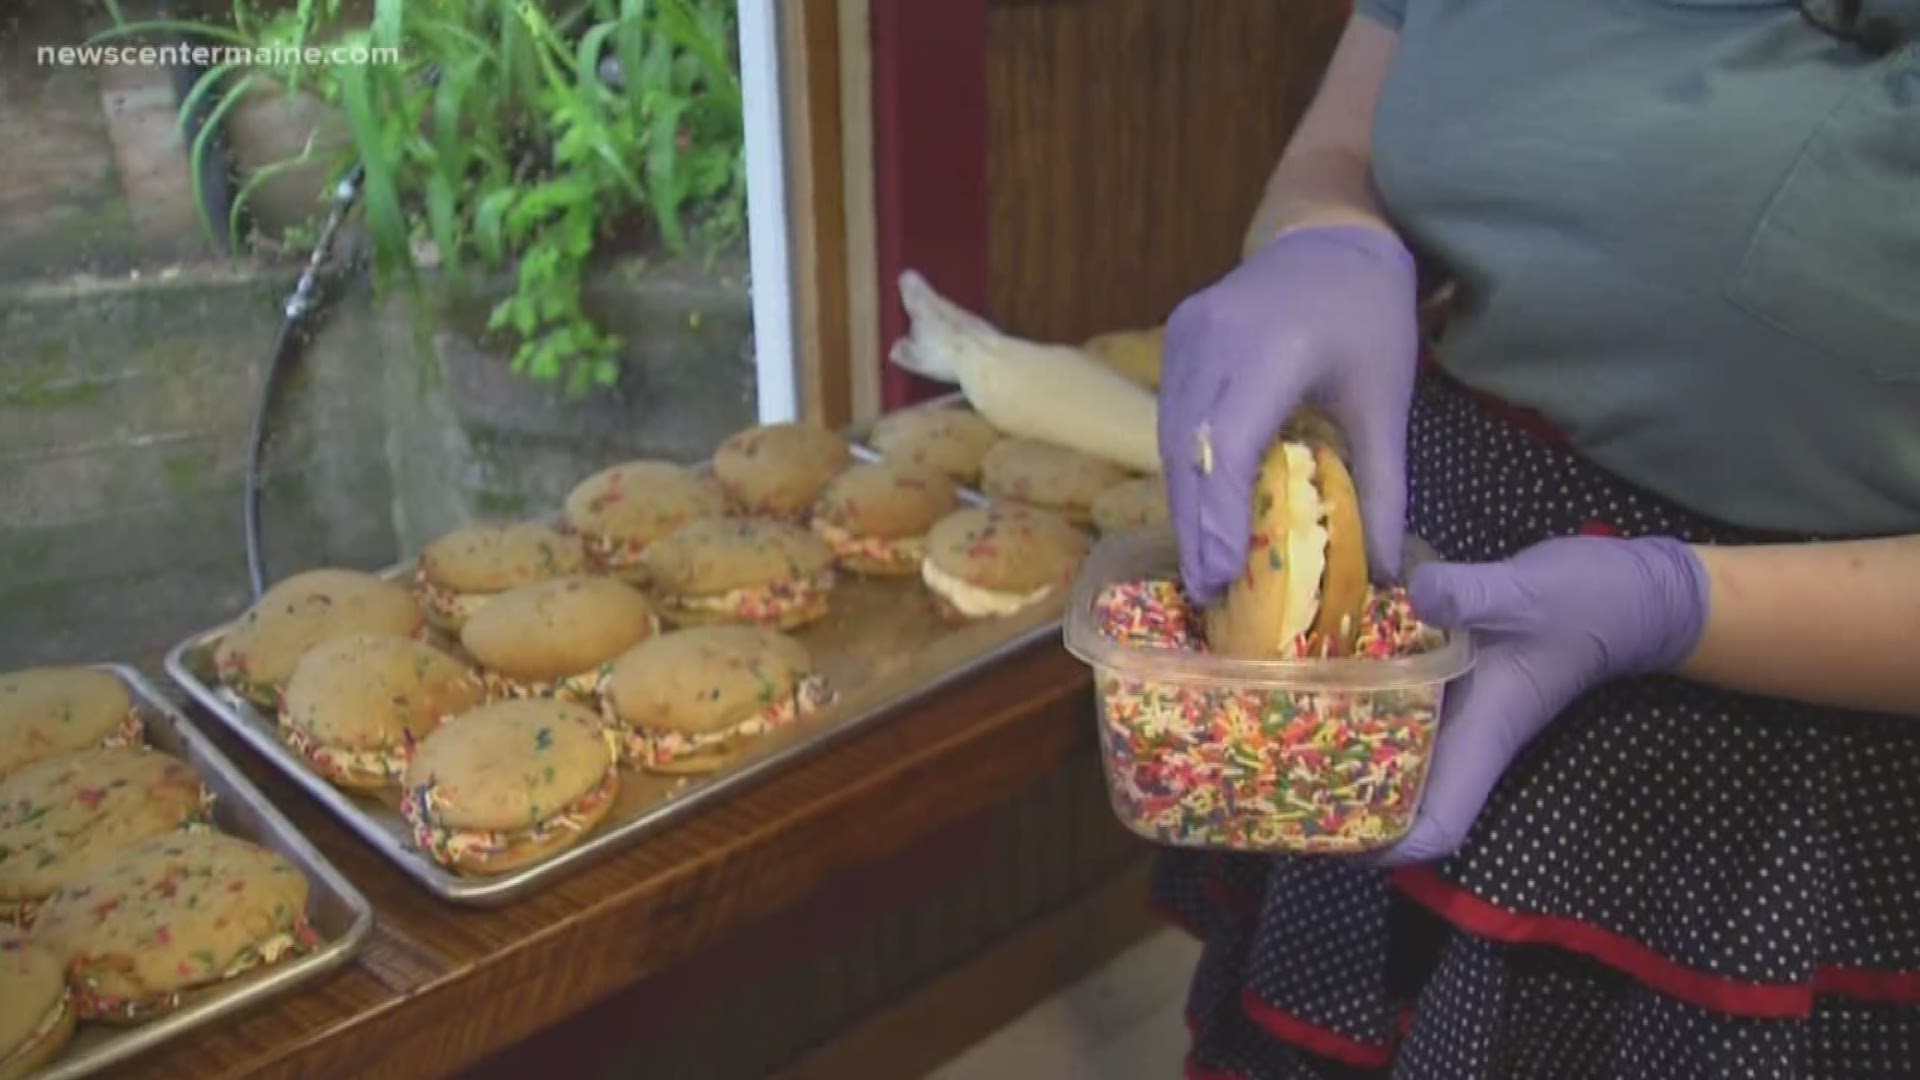 Bakers prepare thousands of whoopie pies for annual Maine festival